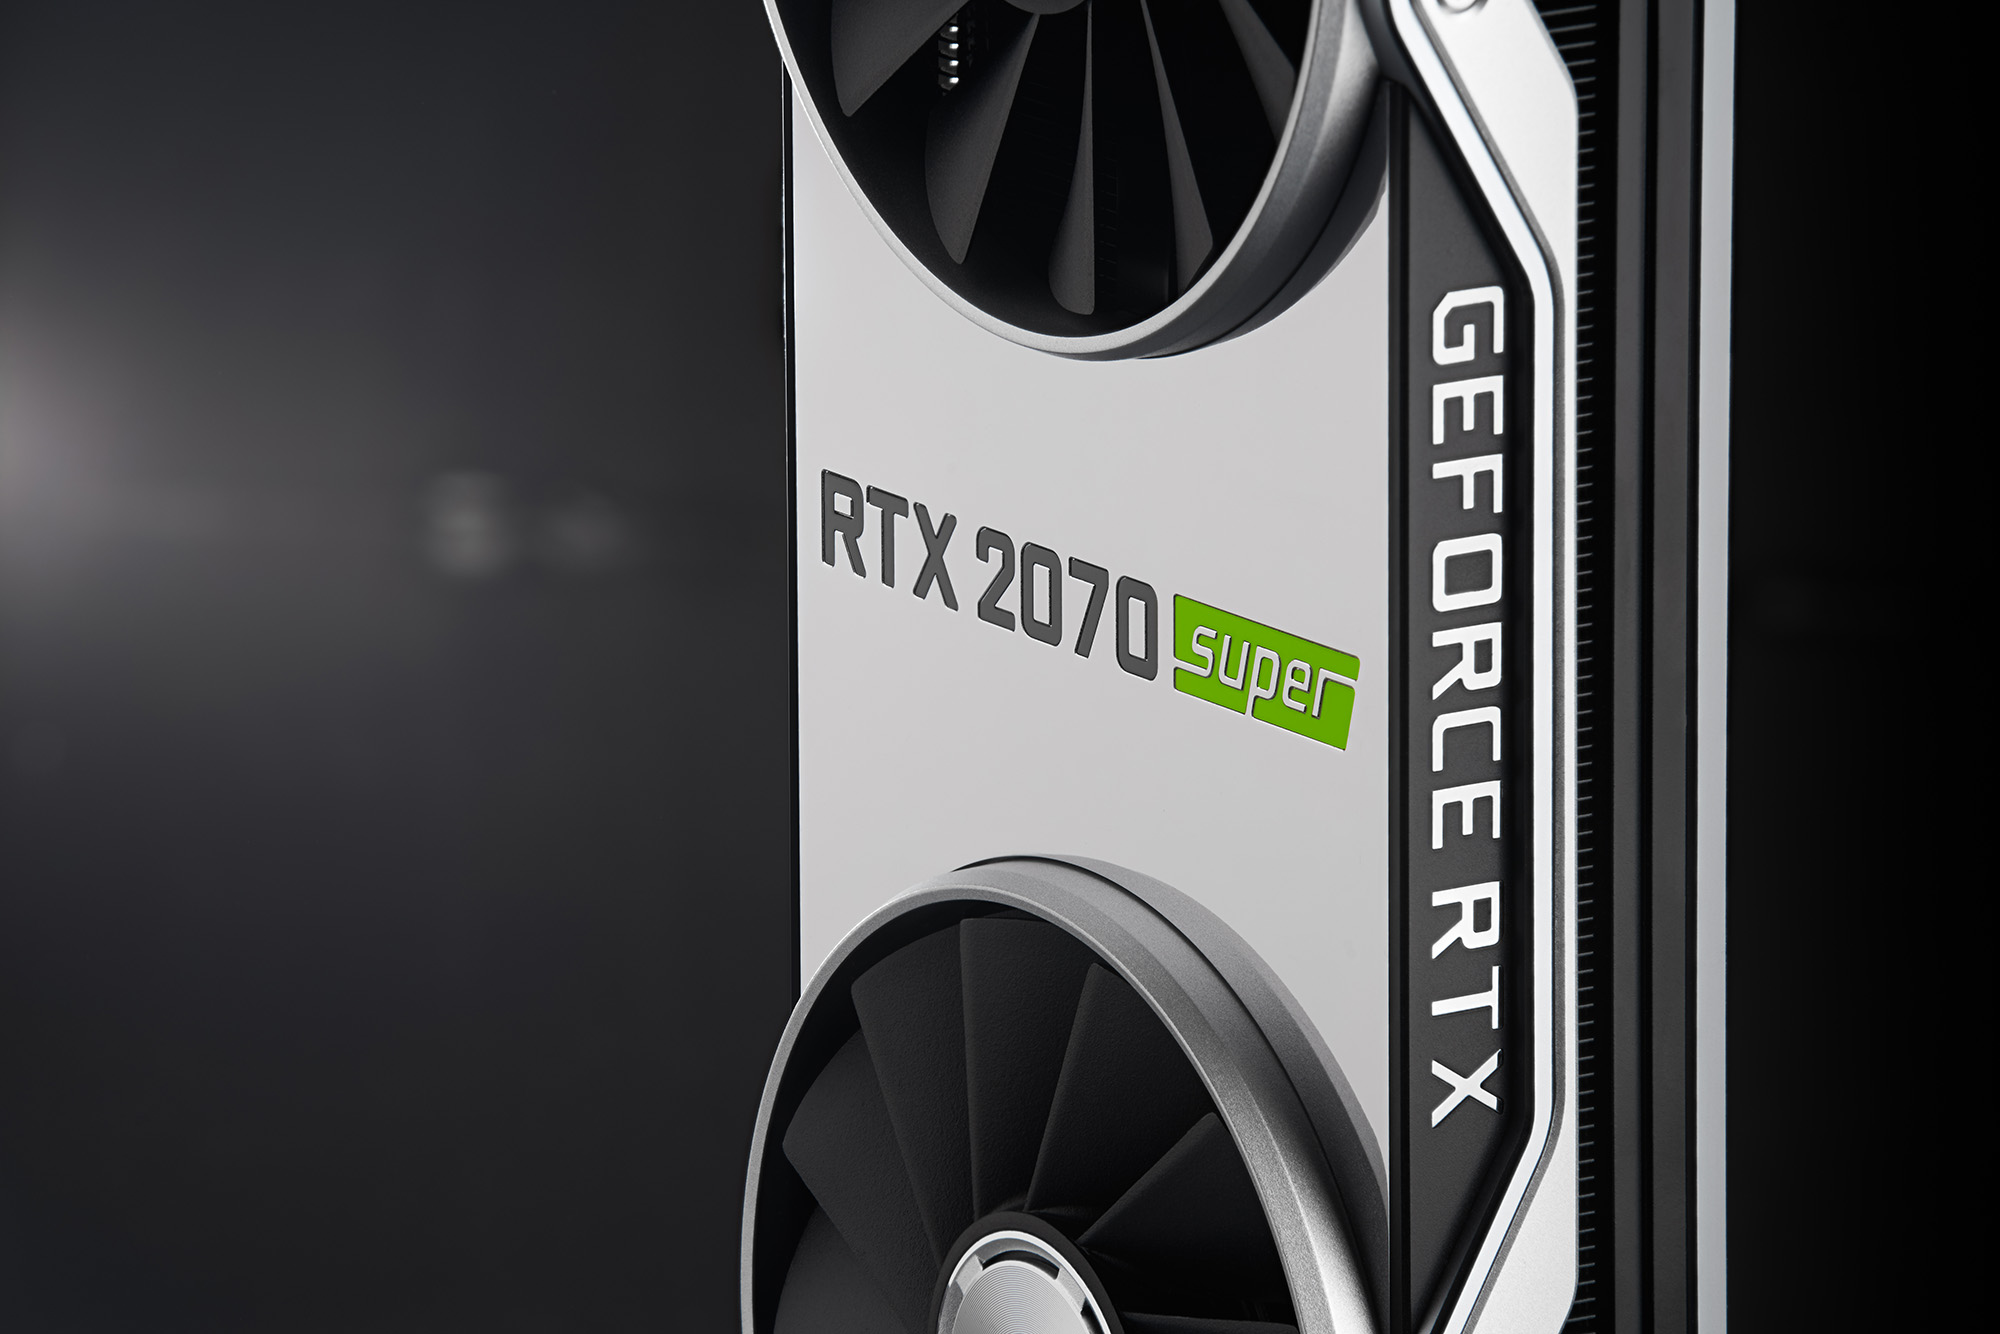 Nvidia releases a GeForce hotfix driver to address crashing and issues | PC Gamer